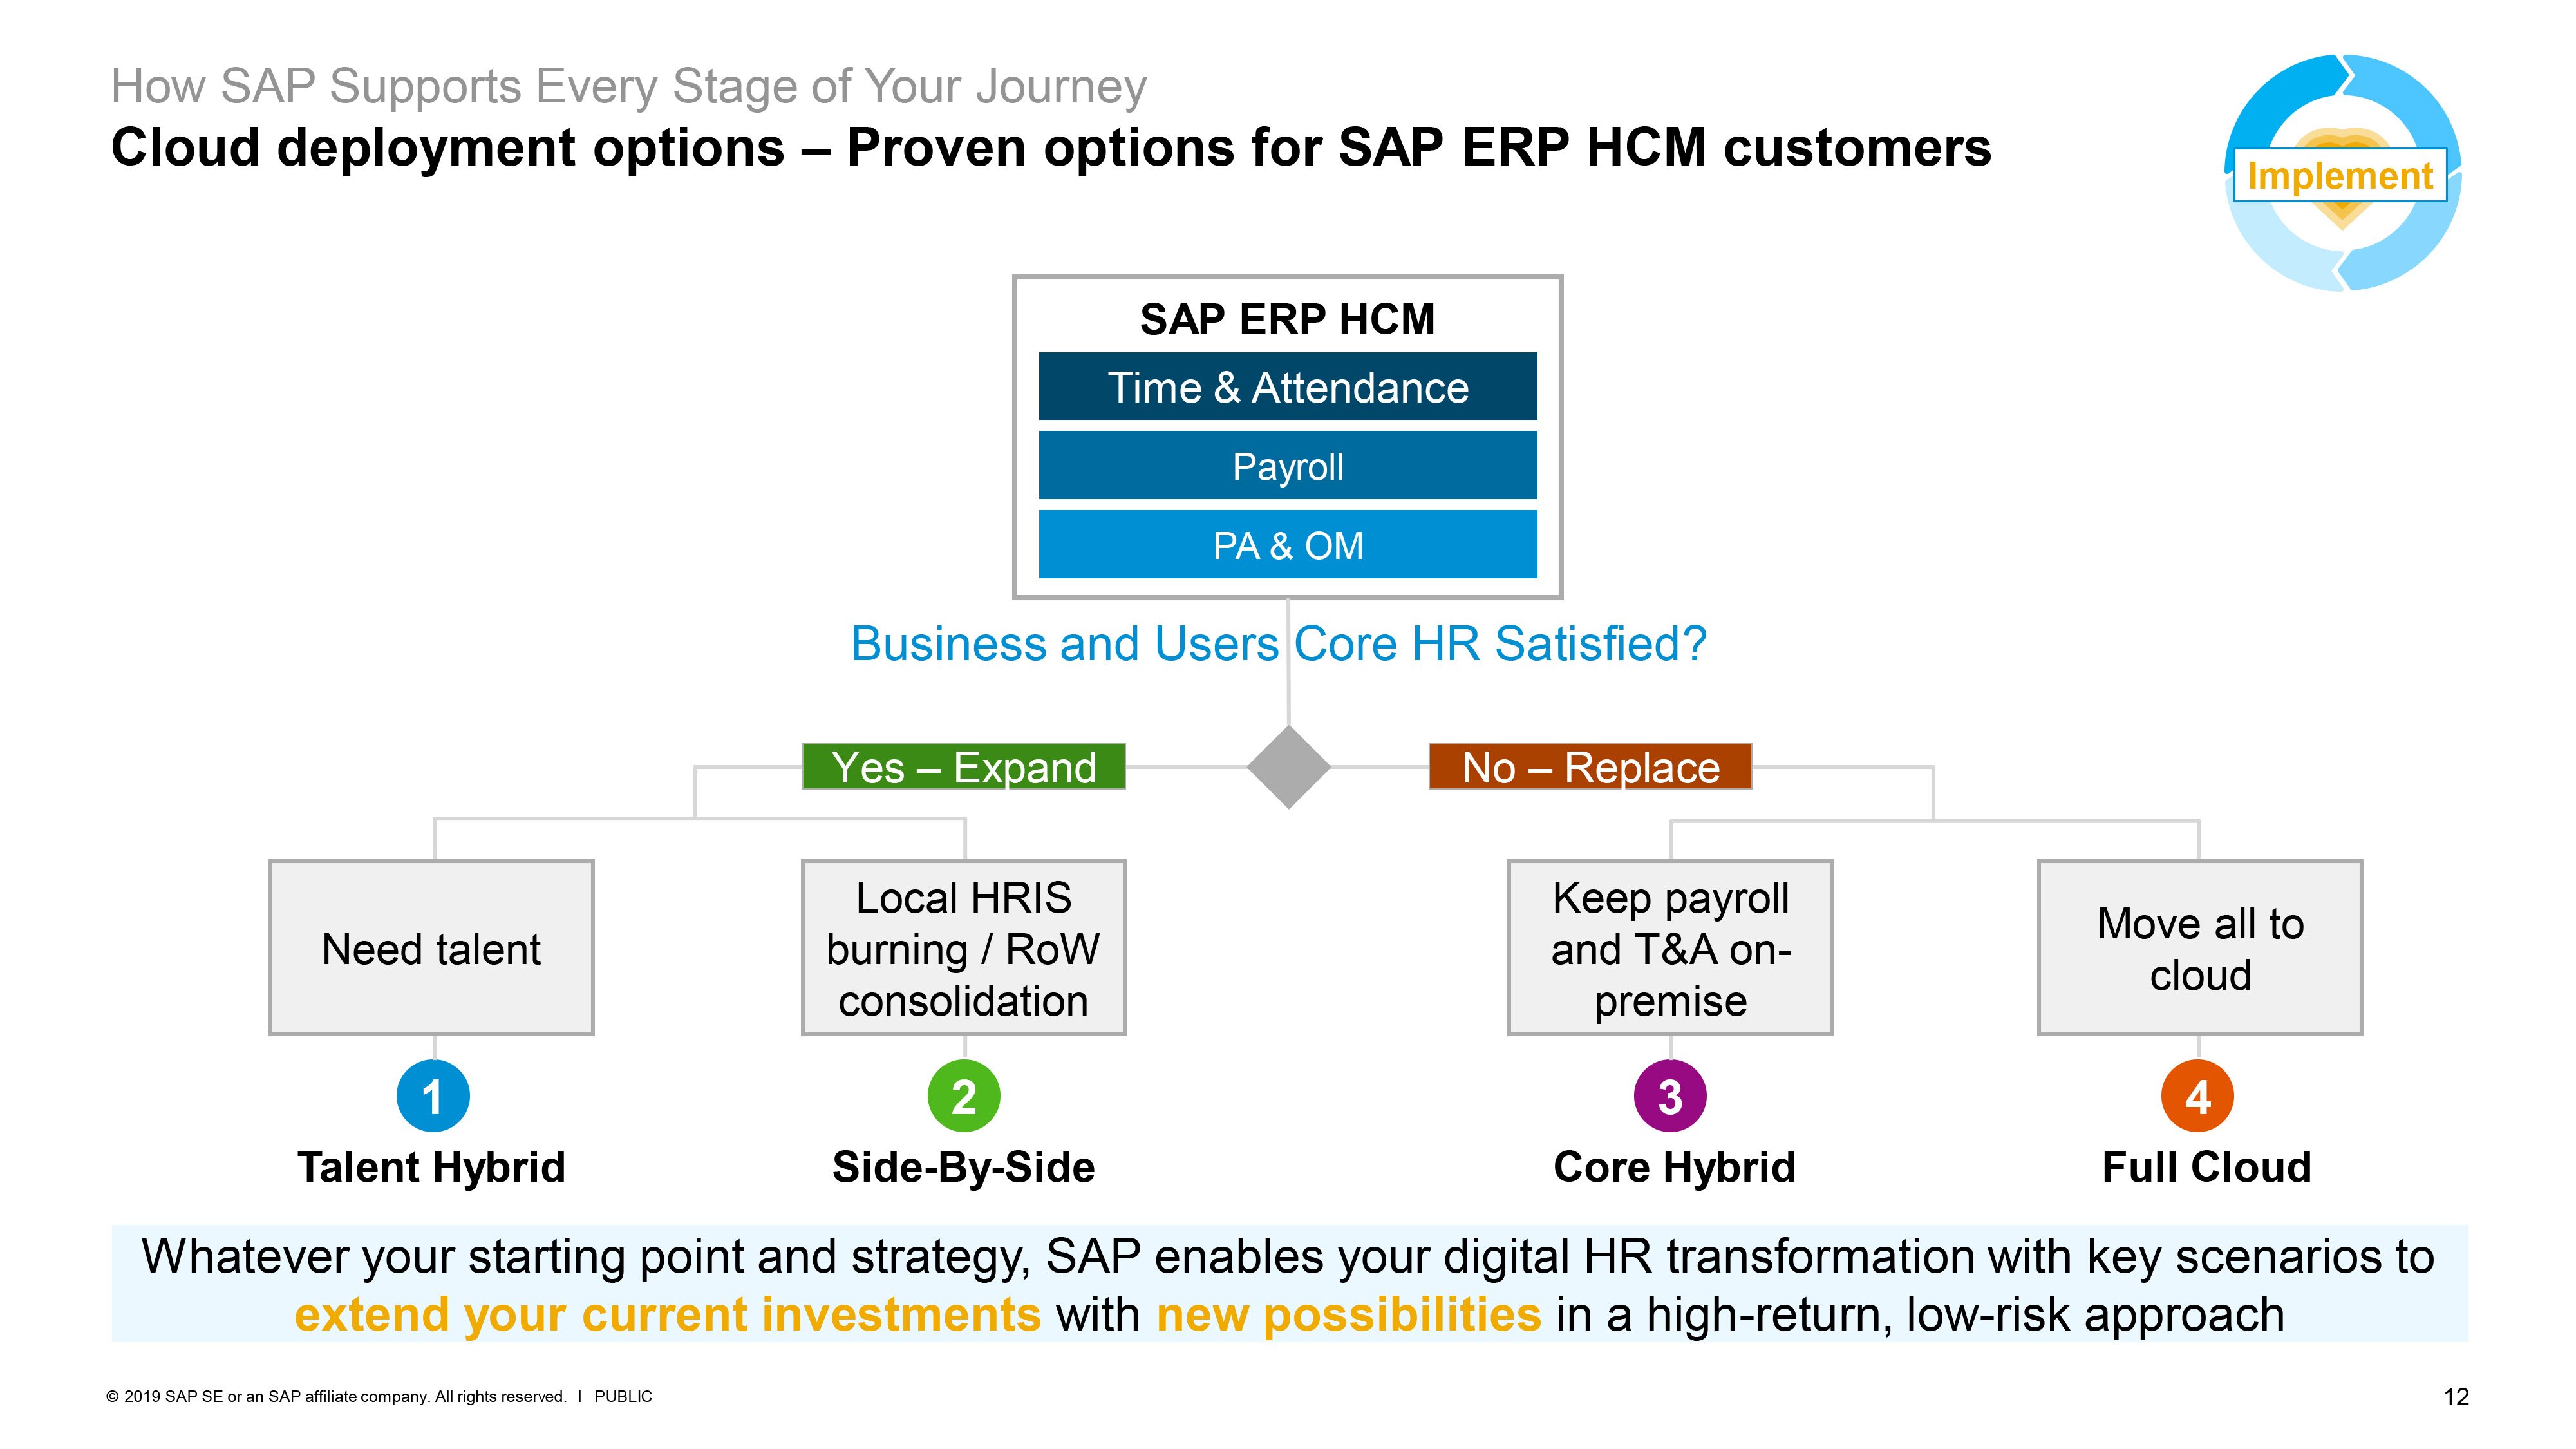 Cloud deployment options – Proven options for SAP ERP HCM customers